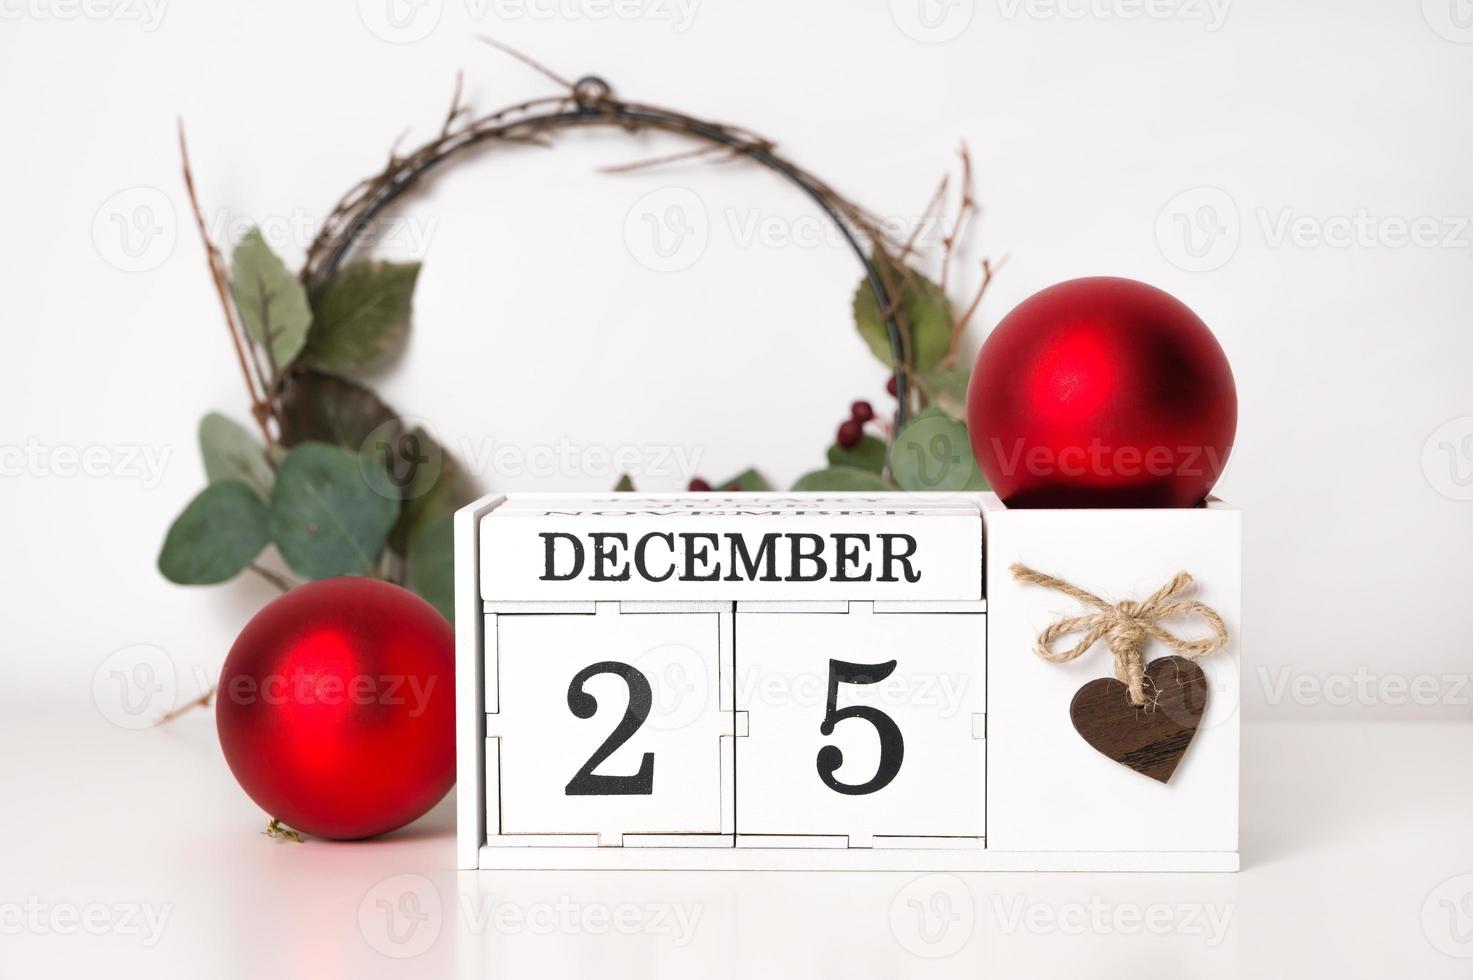 Christmas background with wreath,wooden block calendar and ornaments. December 25th . photo